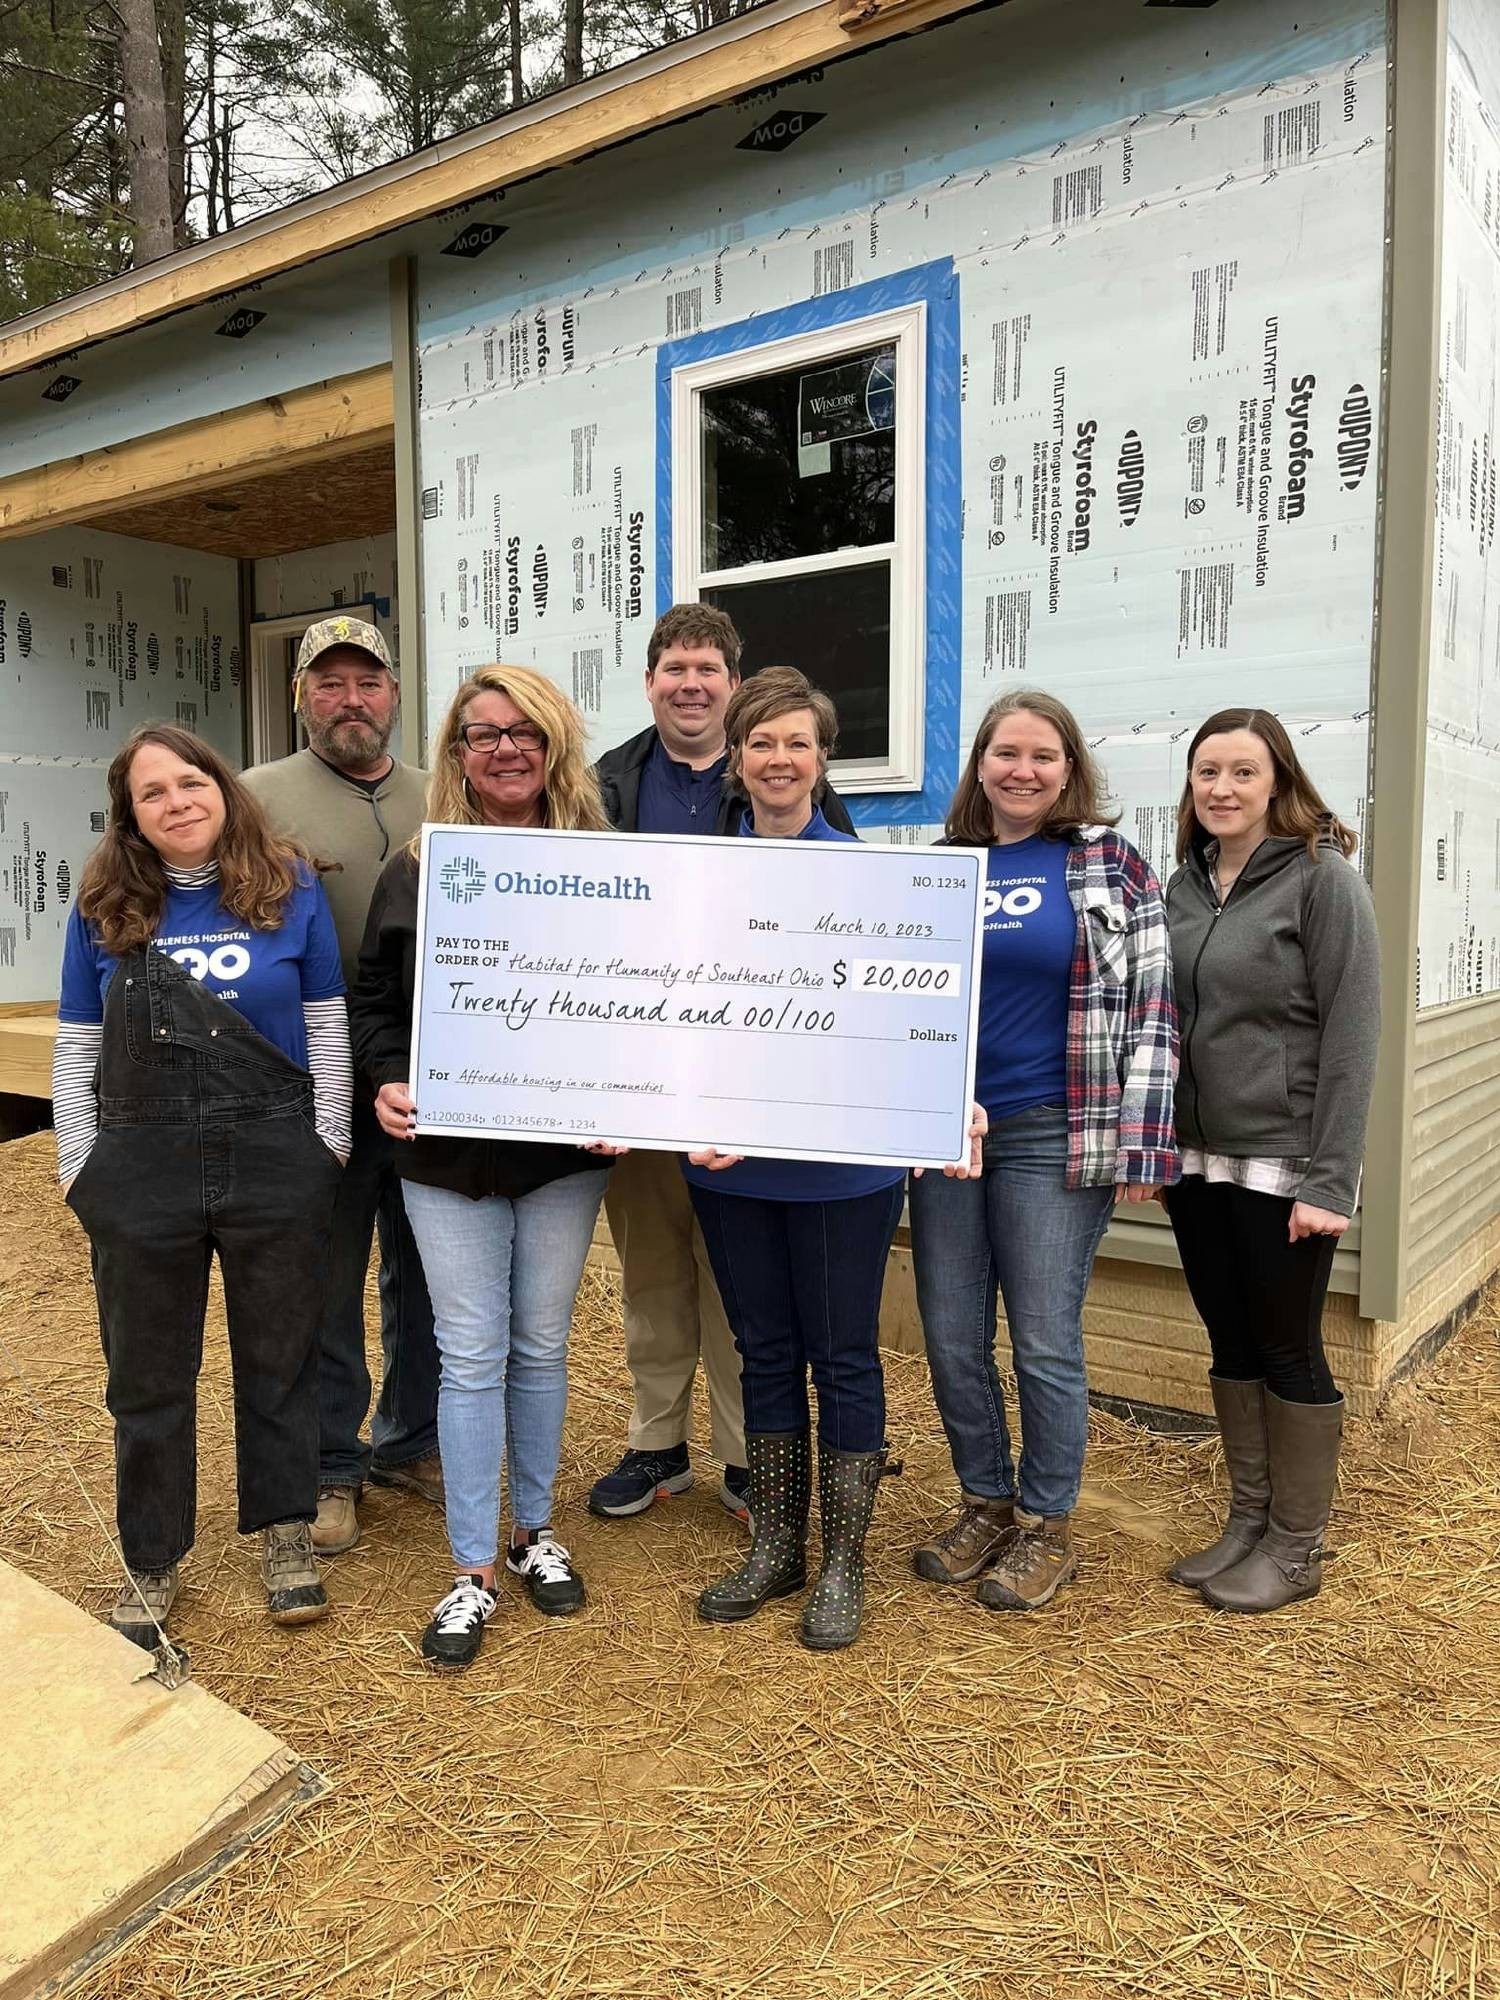 OhioHealth volunteers helped build two new homes with Habitat for Humanity of Southeast Ohio.